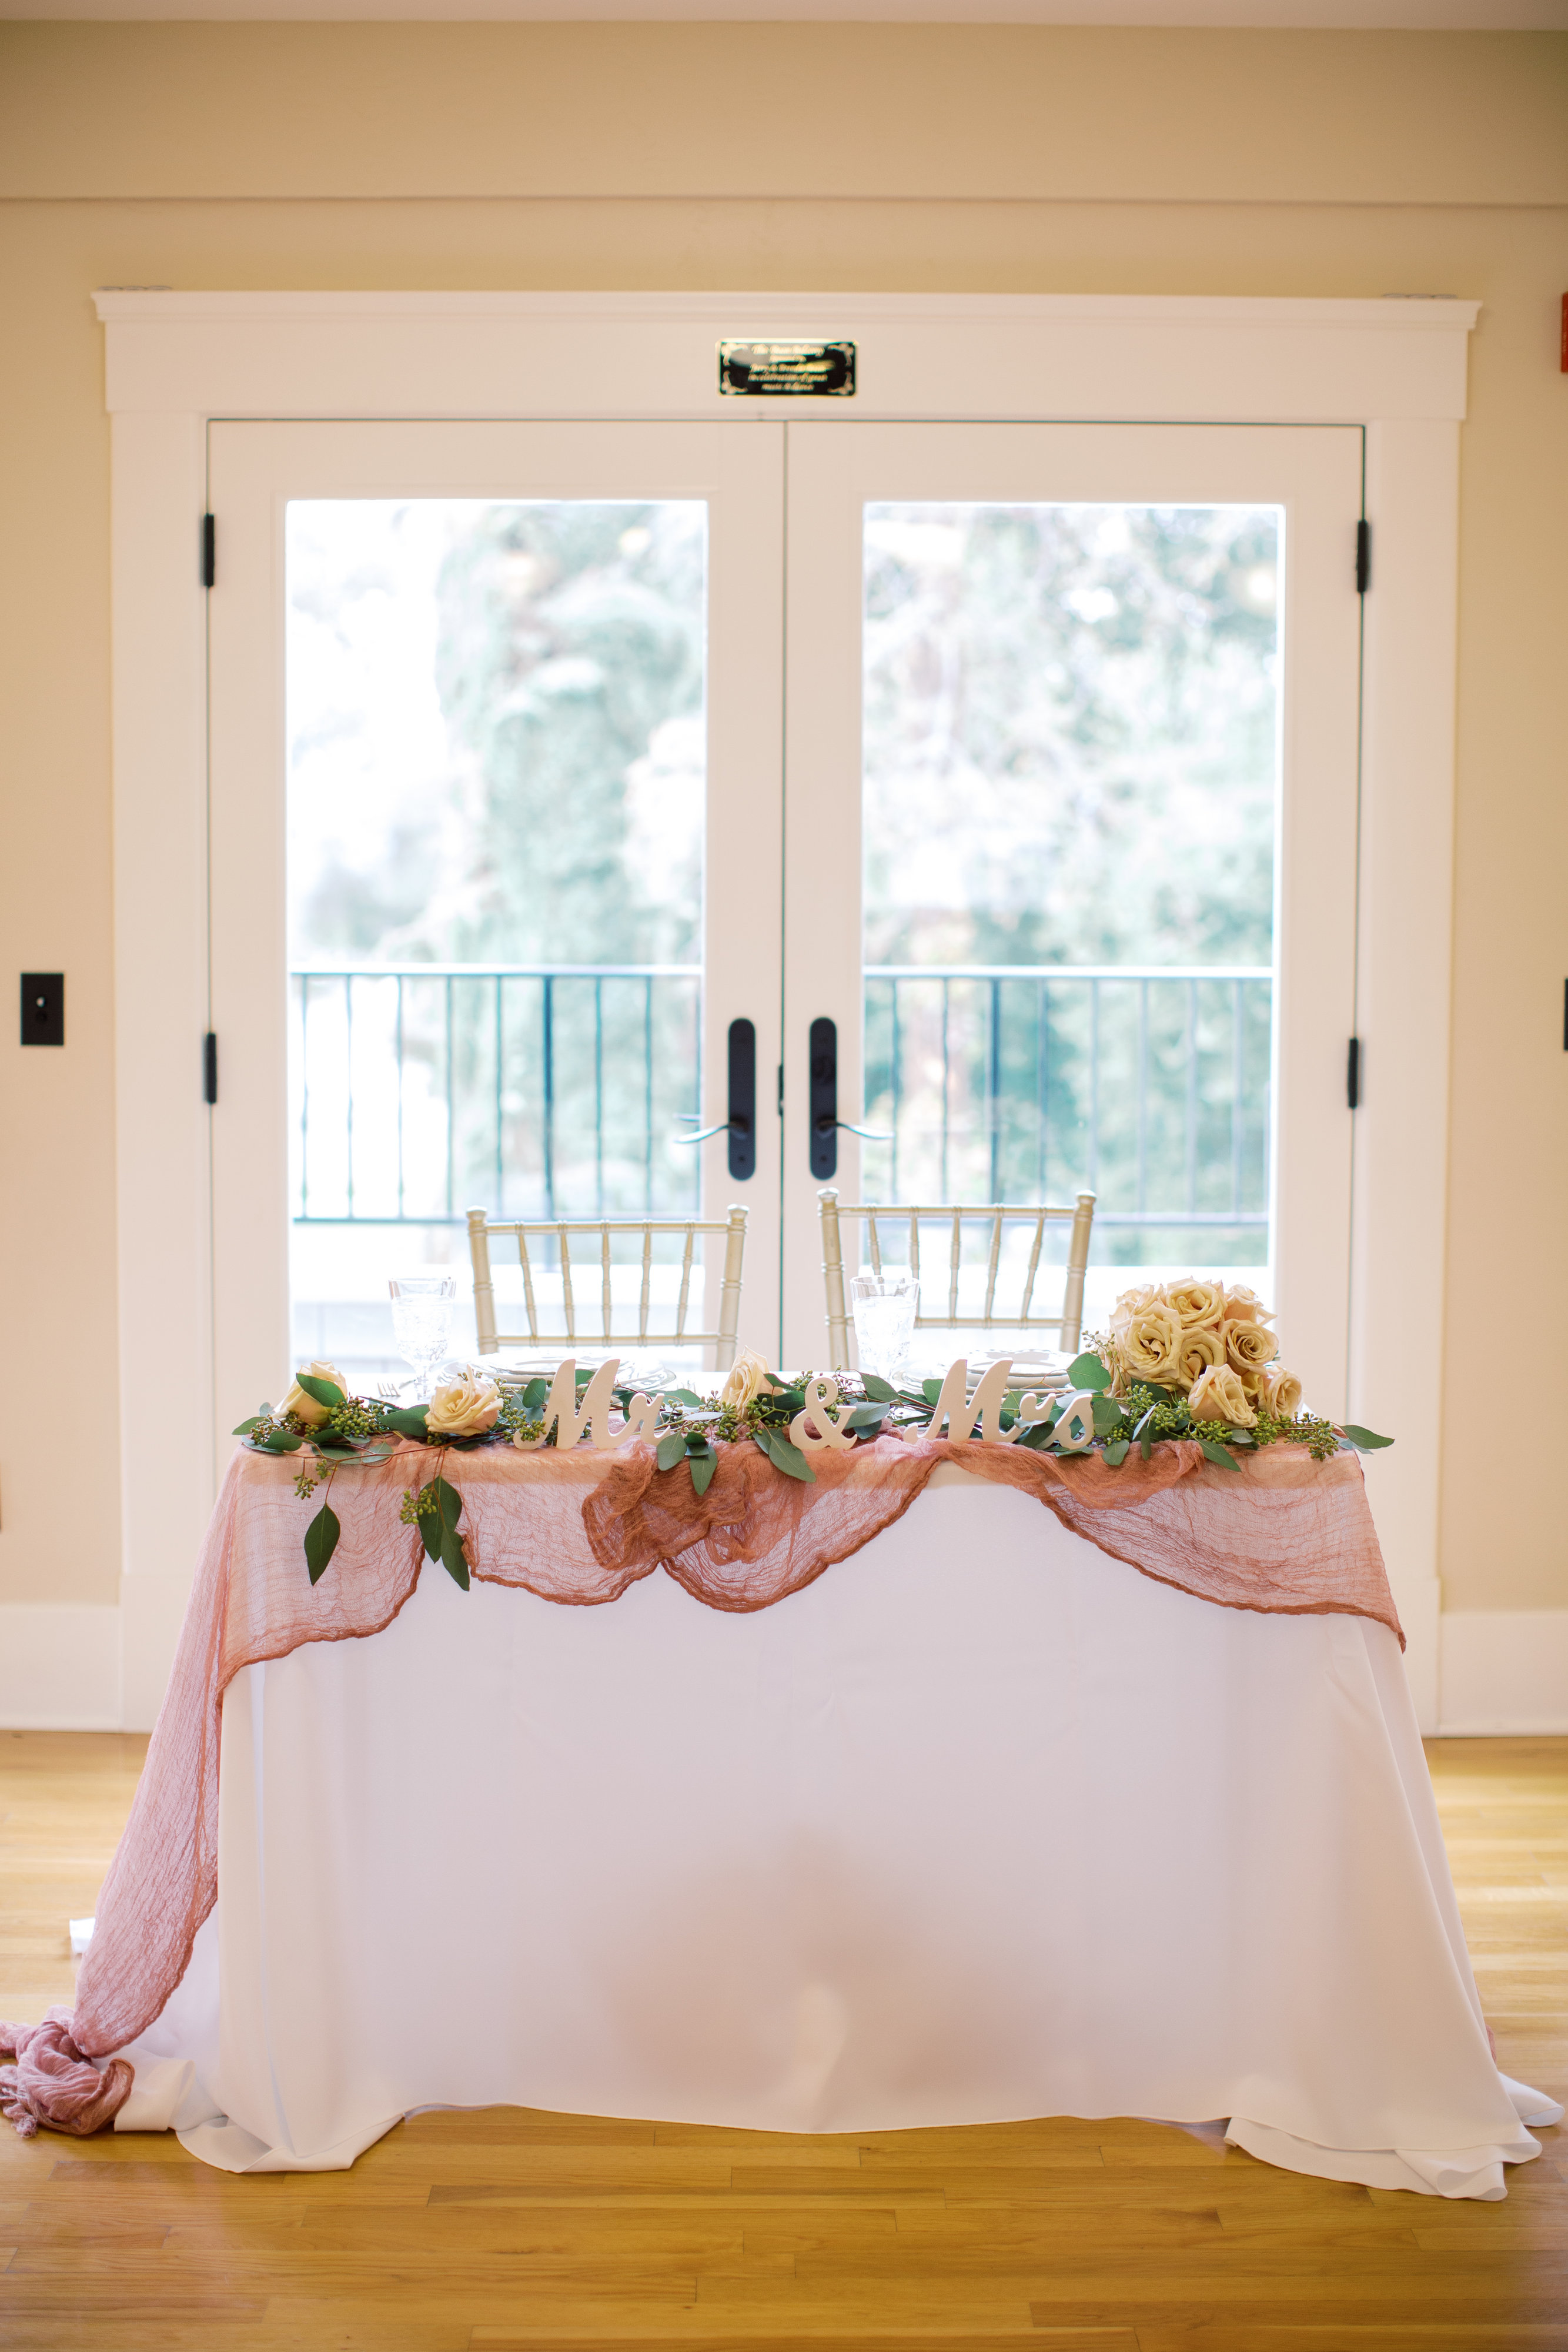 Dangermond Hall at the Mission Gables House is perfect for any event.